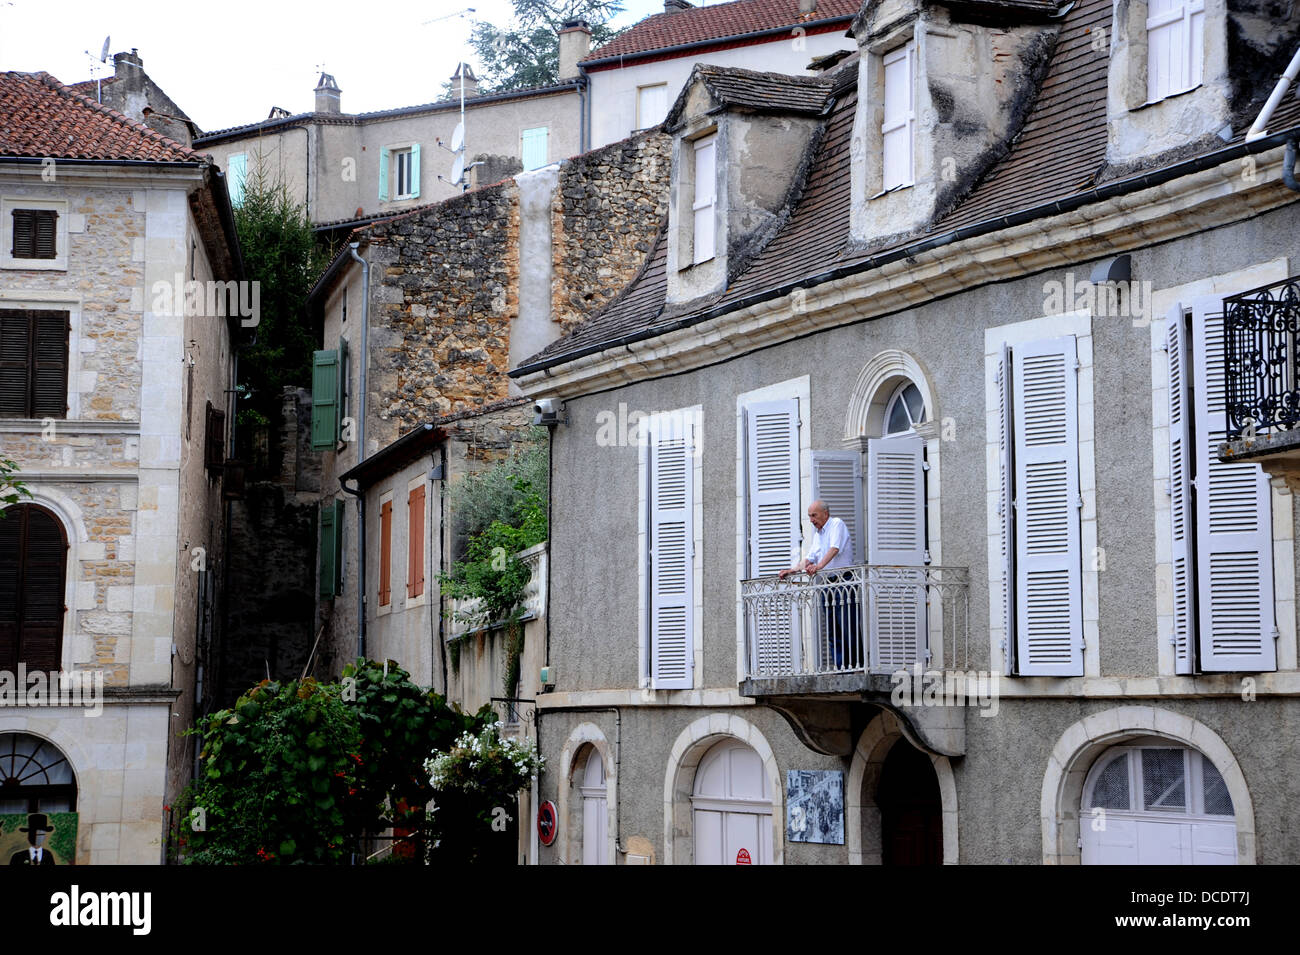 Man standing on balcony of building in the medieval town of Puy L'Eveque in the Lot Region or Department of France Stock Photo